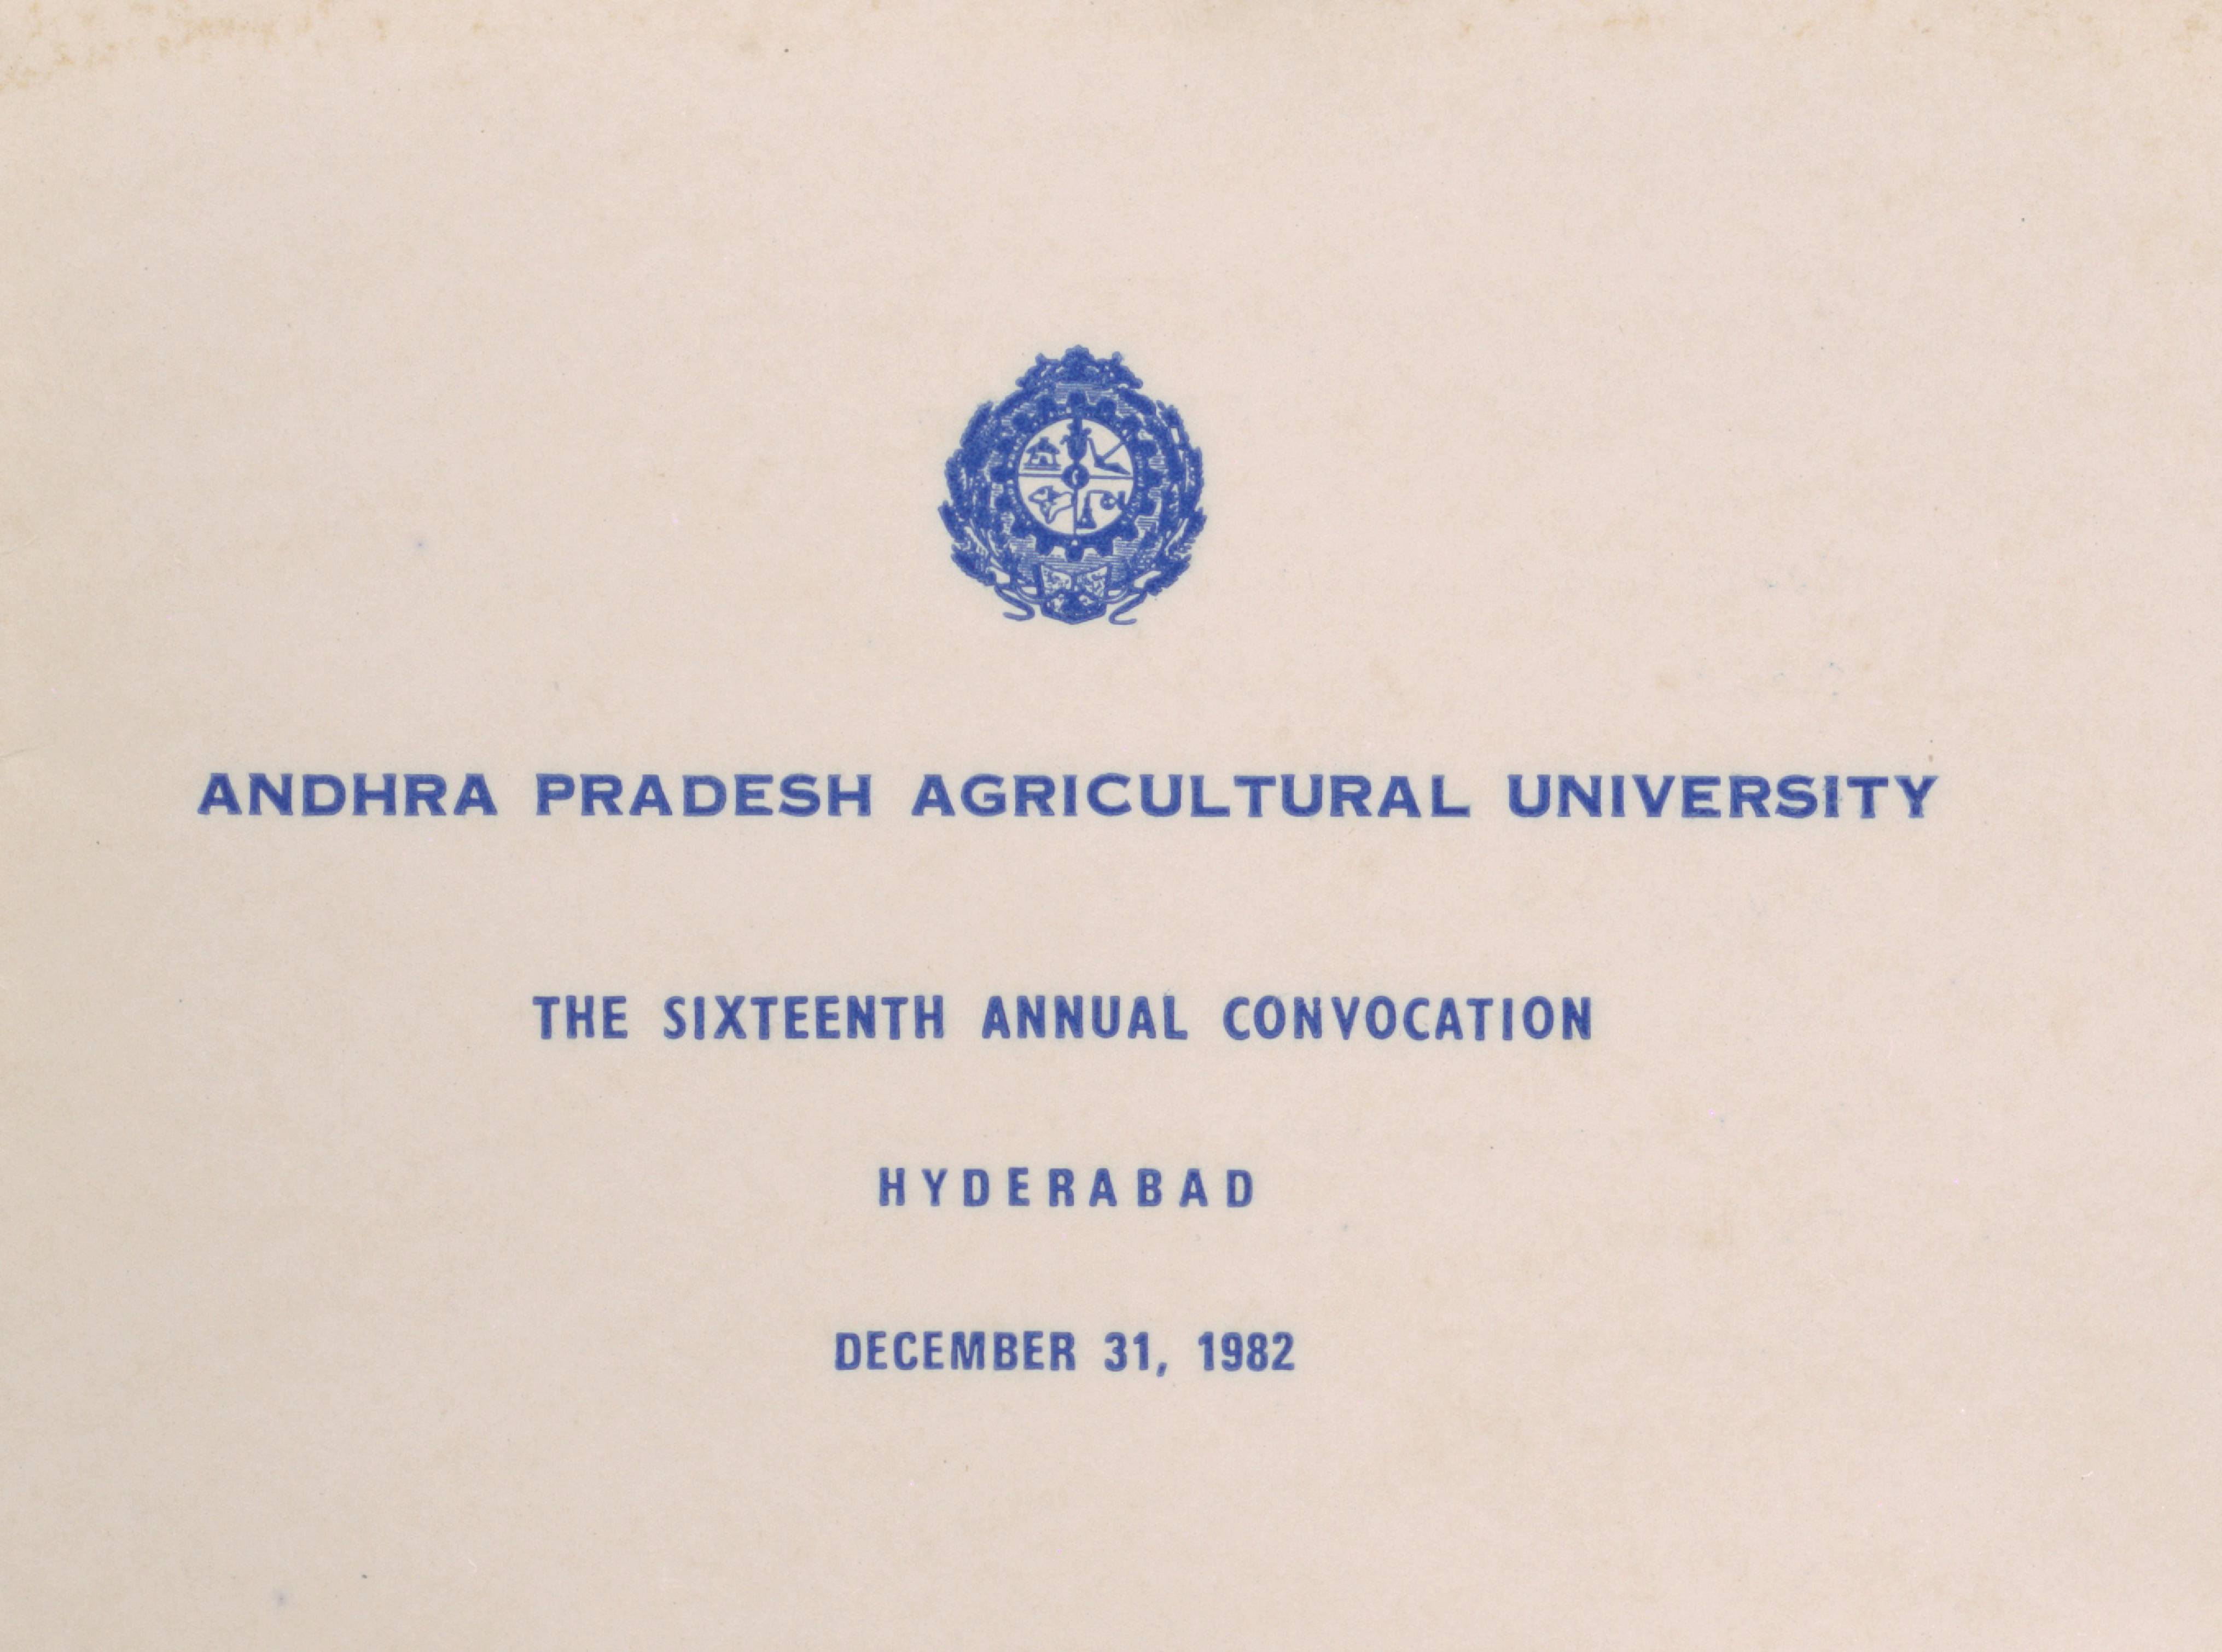 Andhra Pradesh Agricultural University, The Sixteenth Annual Convocation, Hyderabad